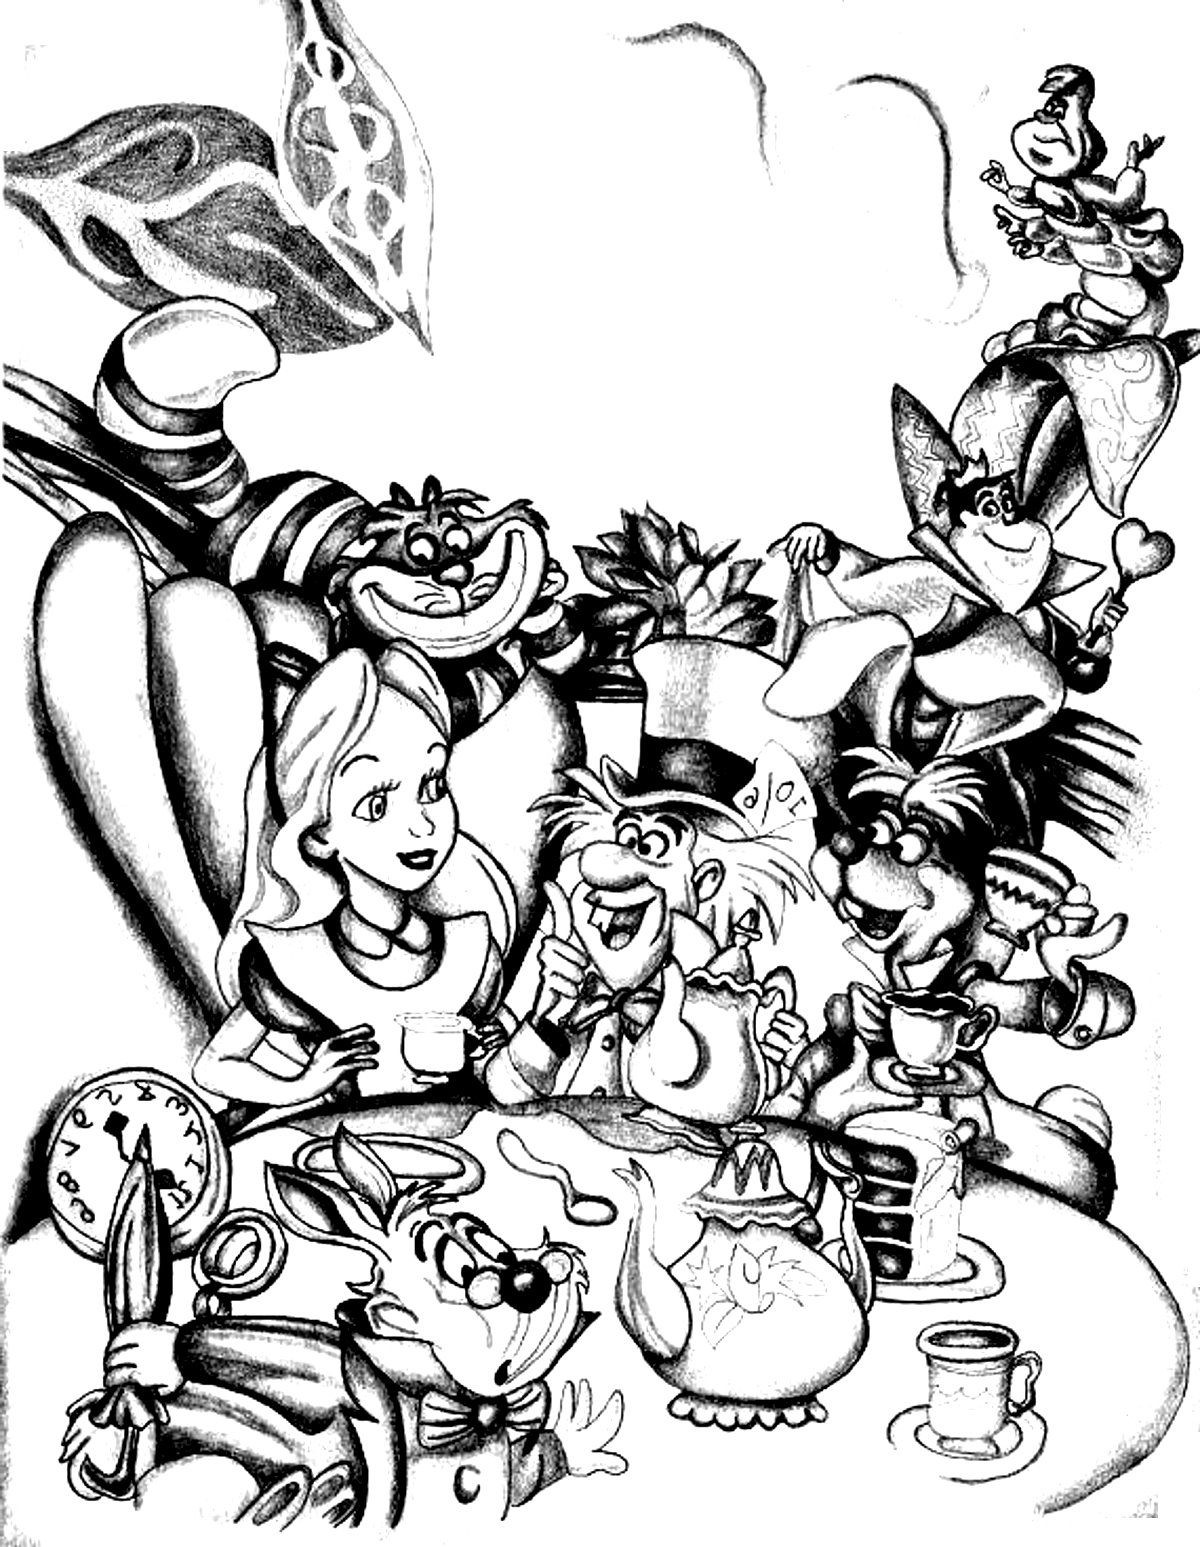 Download Disney drawing alice in wonderland - Return to childhood Adult Coloring Pages